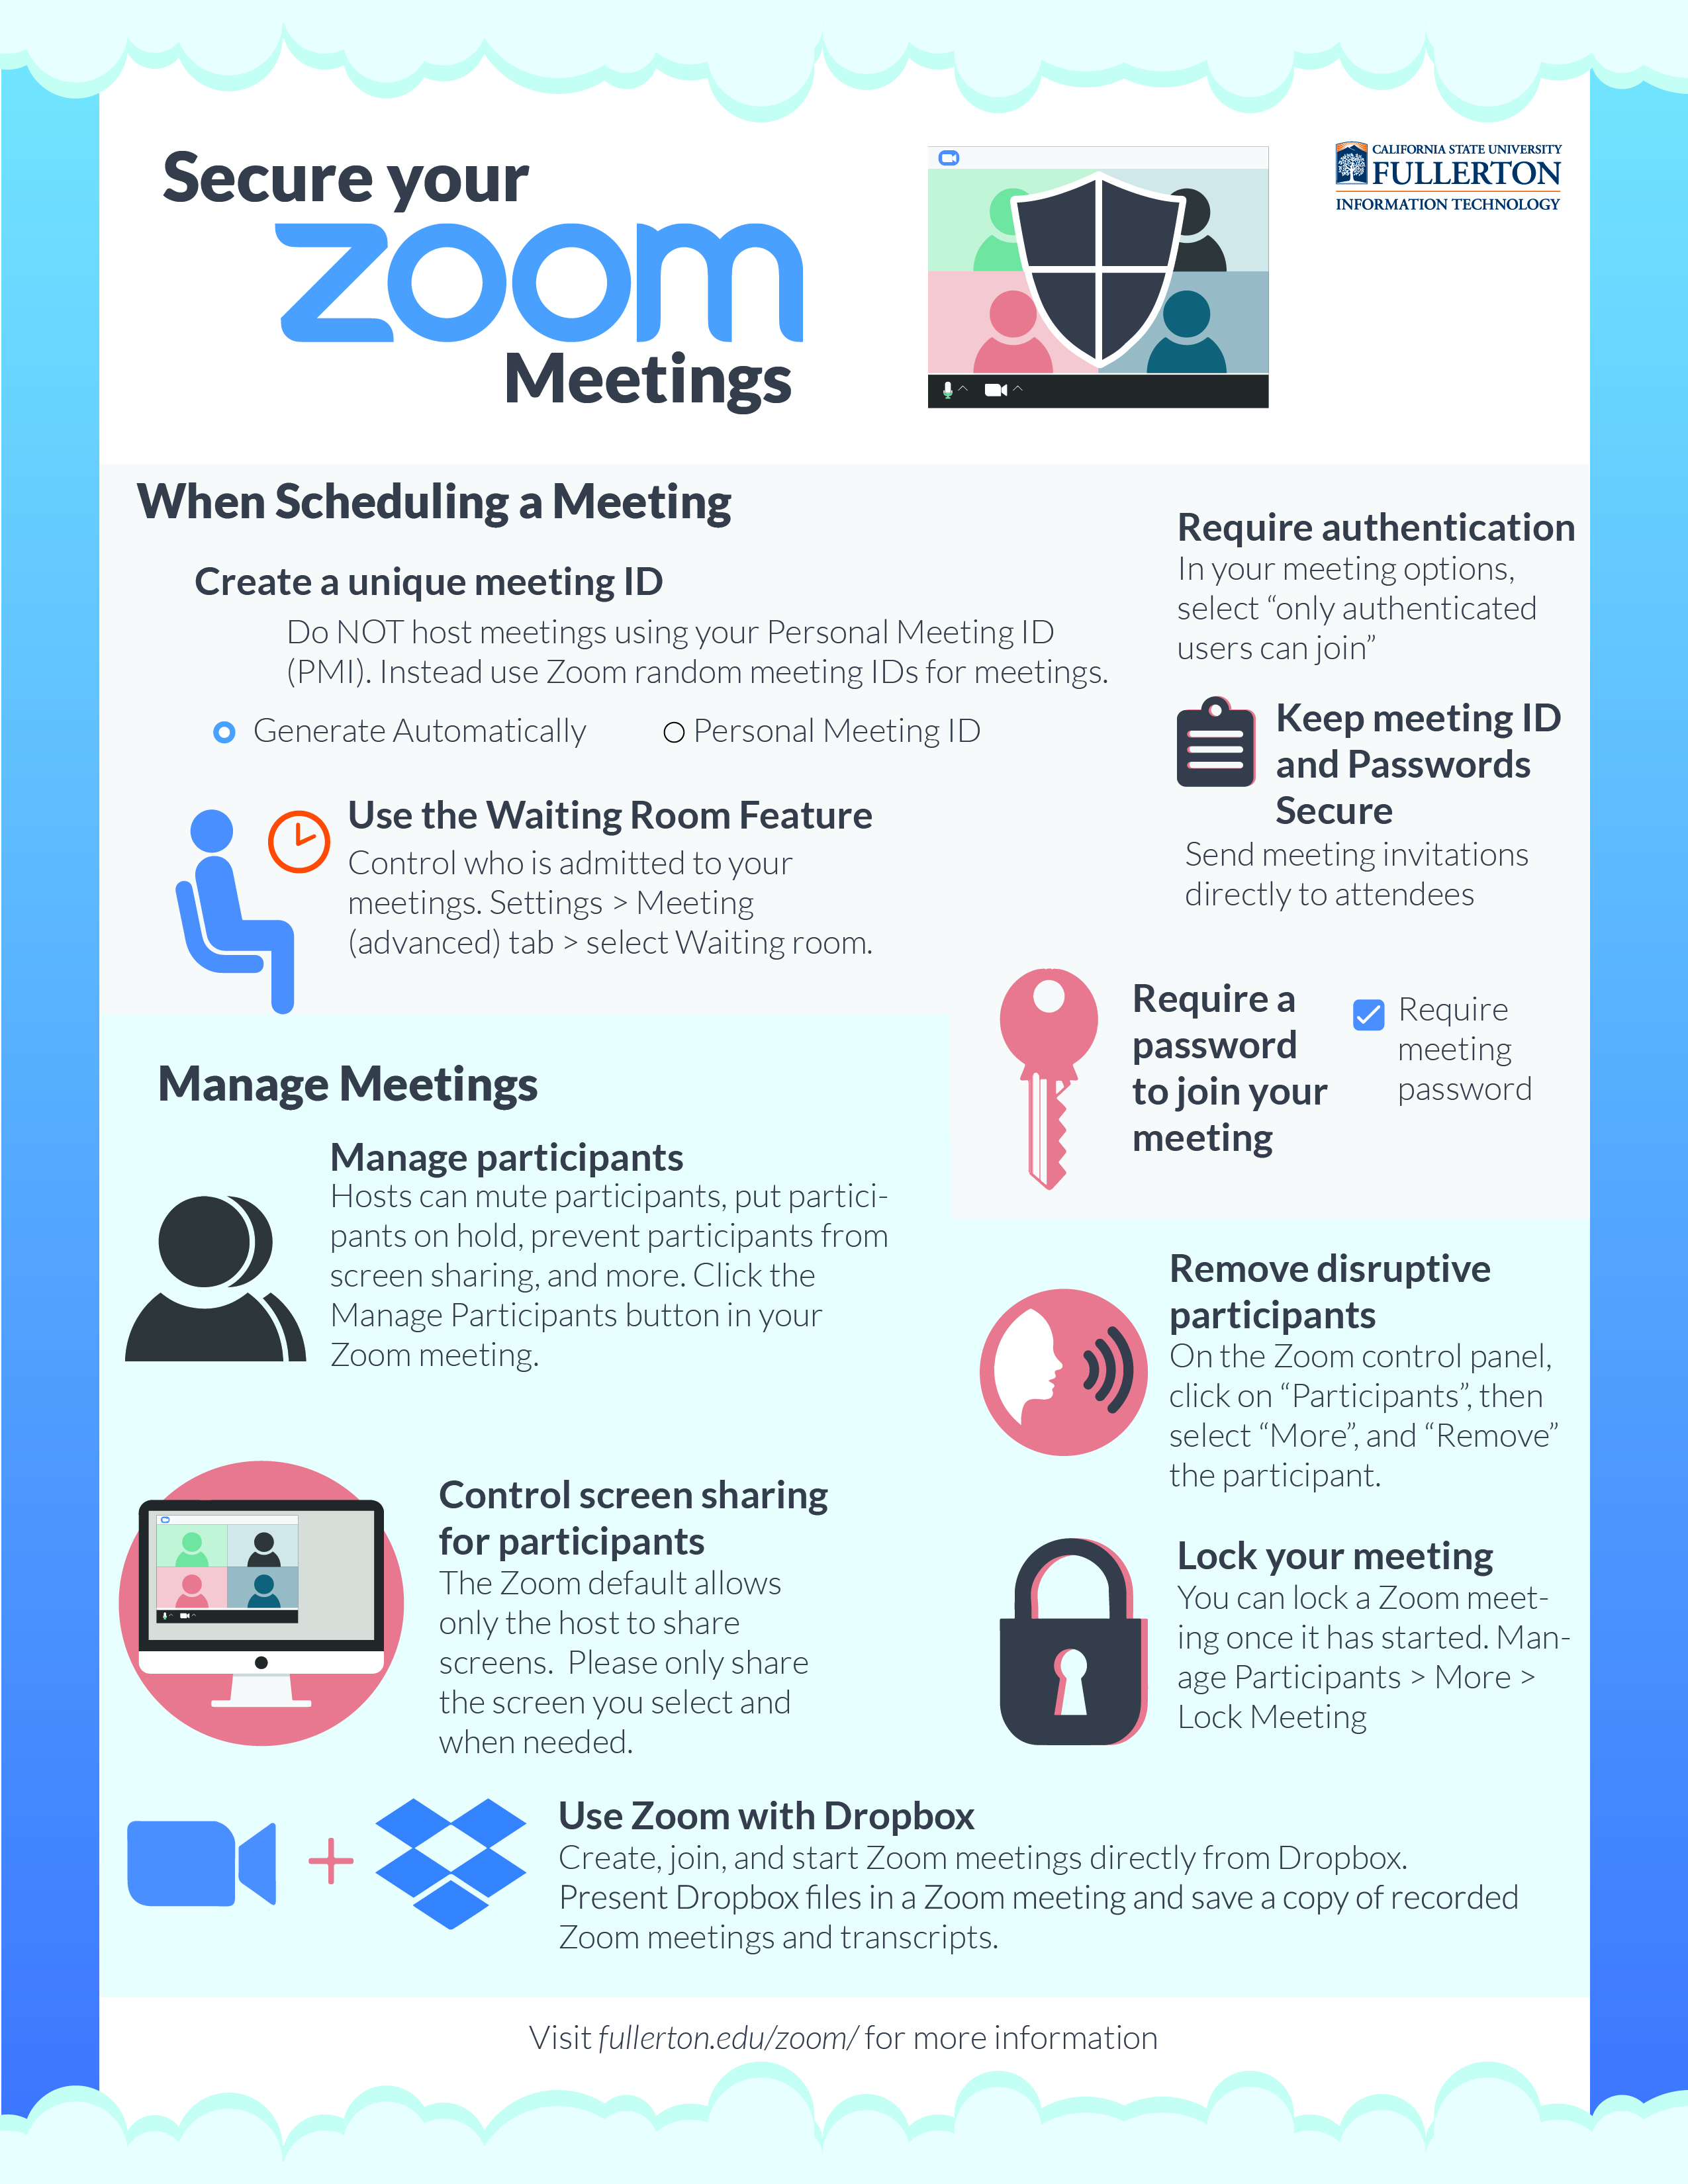 Secure your Zoom meetings thumbnail